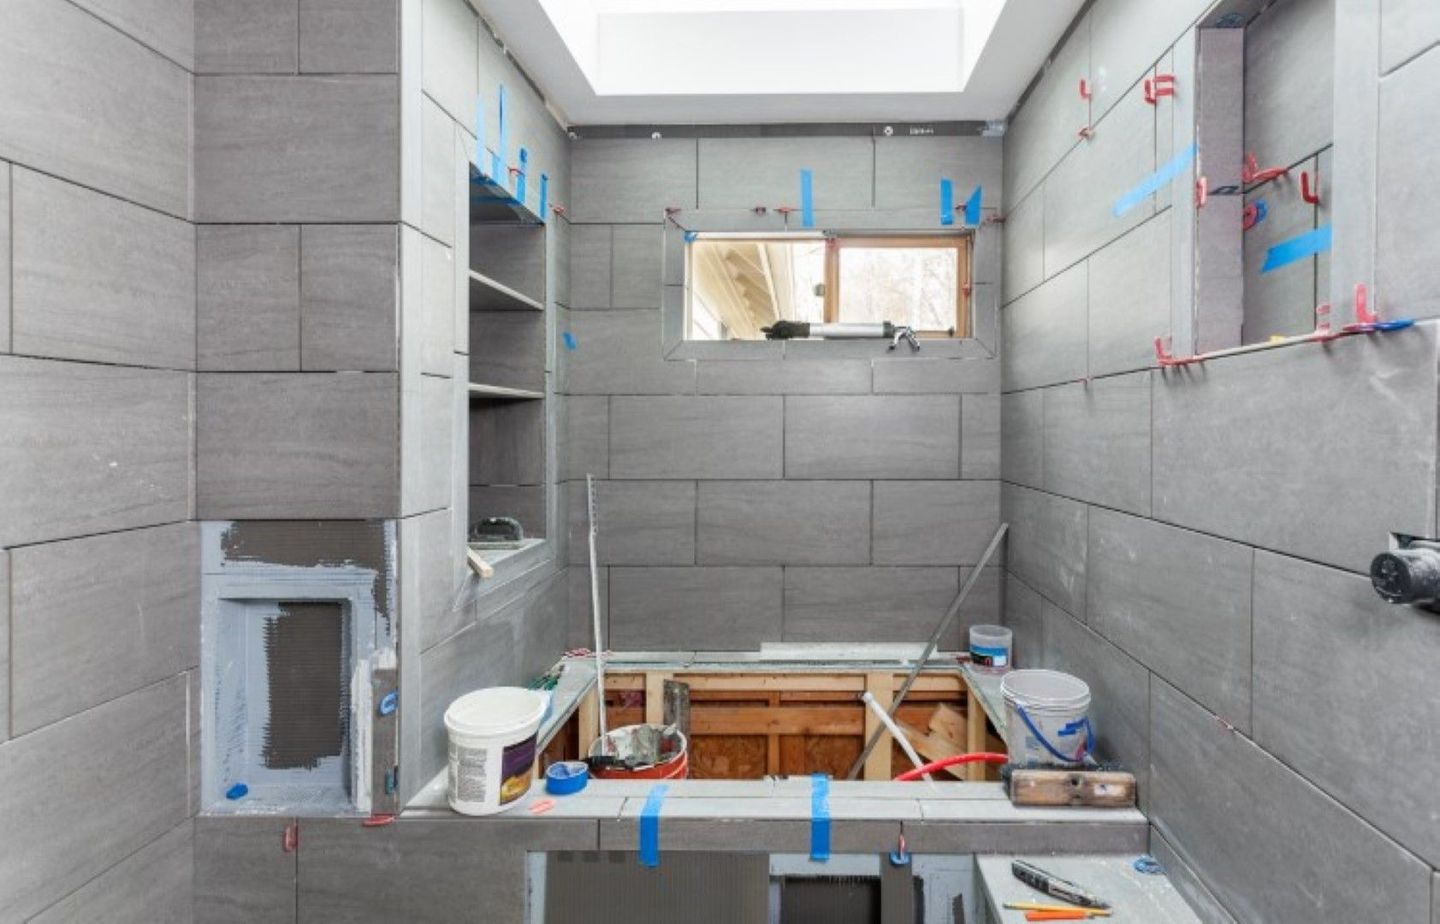 An image of Bathroom Renovations Services in Airdrie, AB